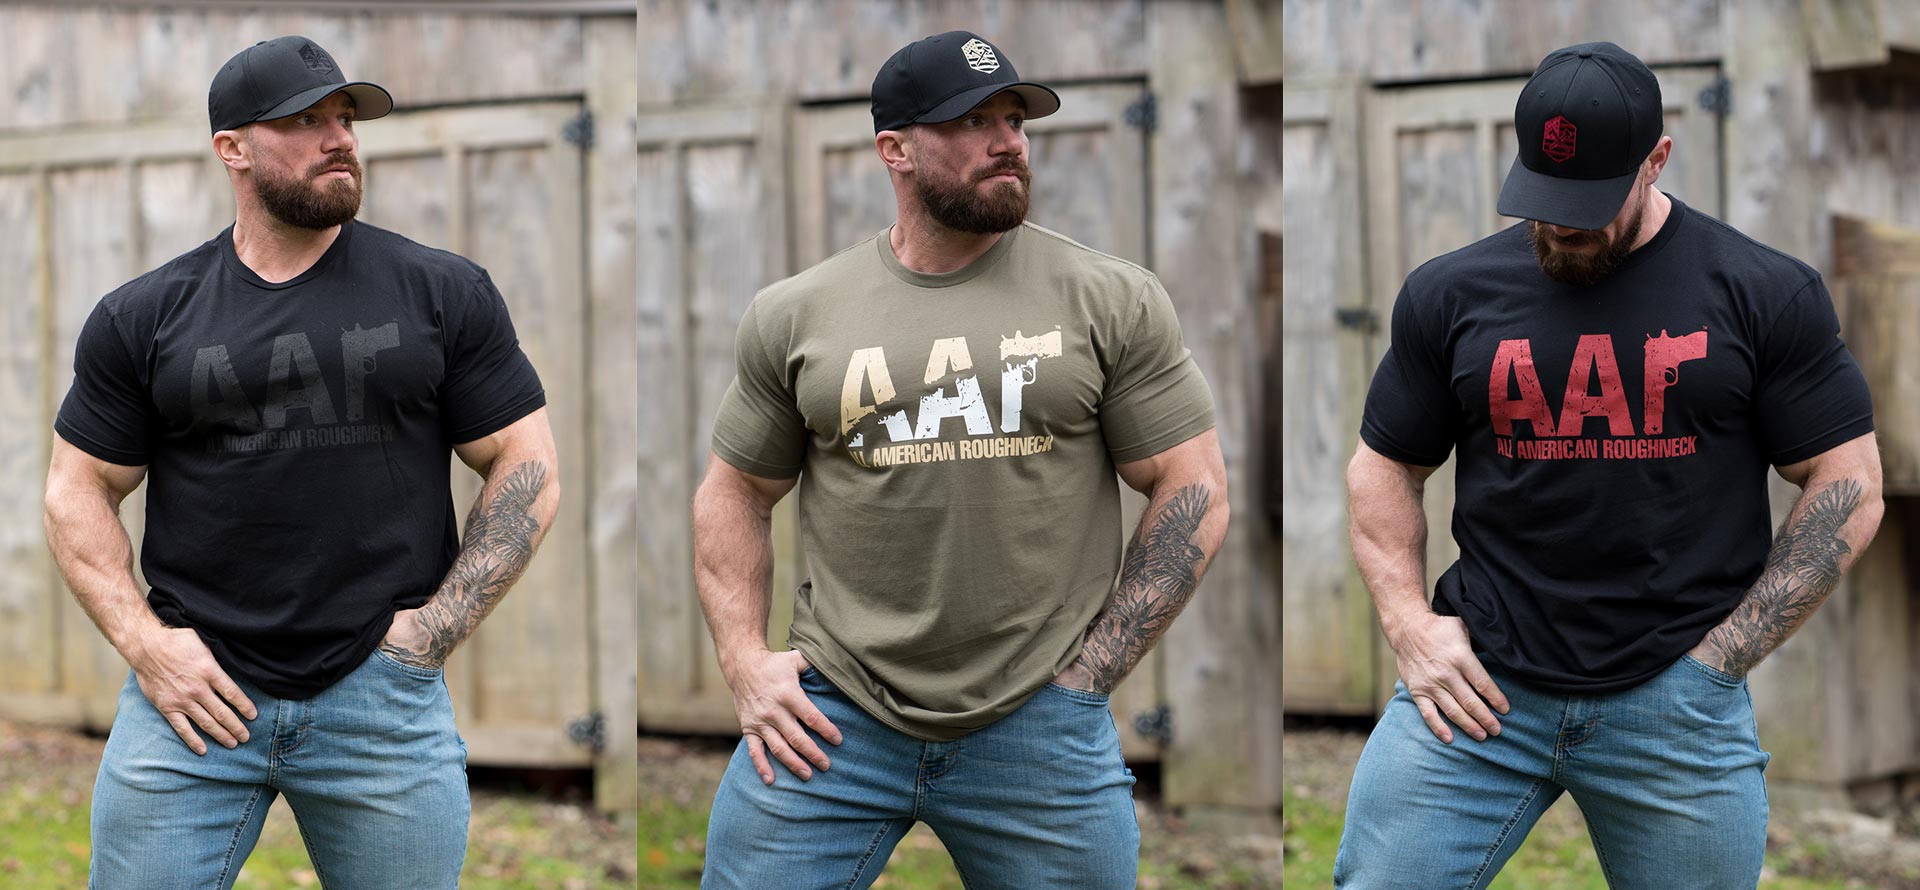 Black Friday 2019 - All American Roughneck